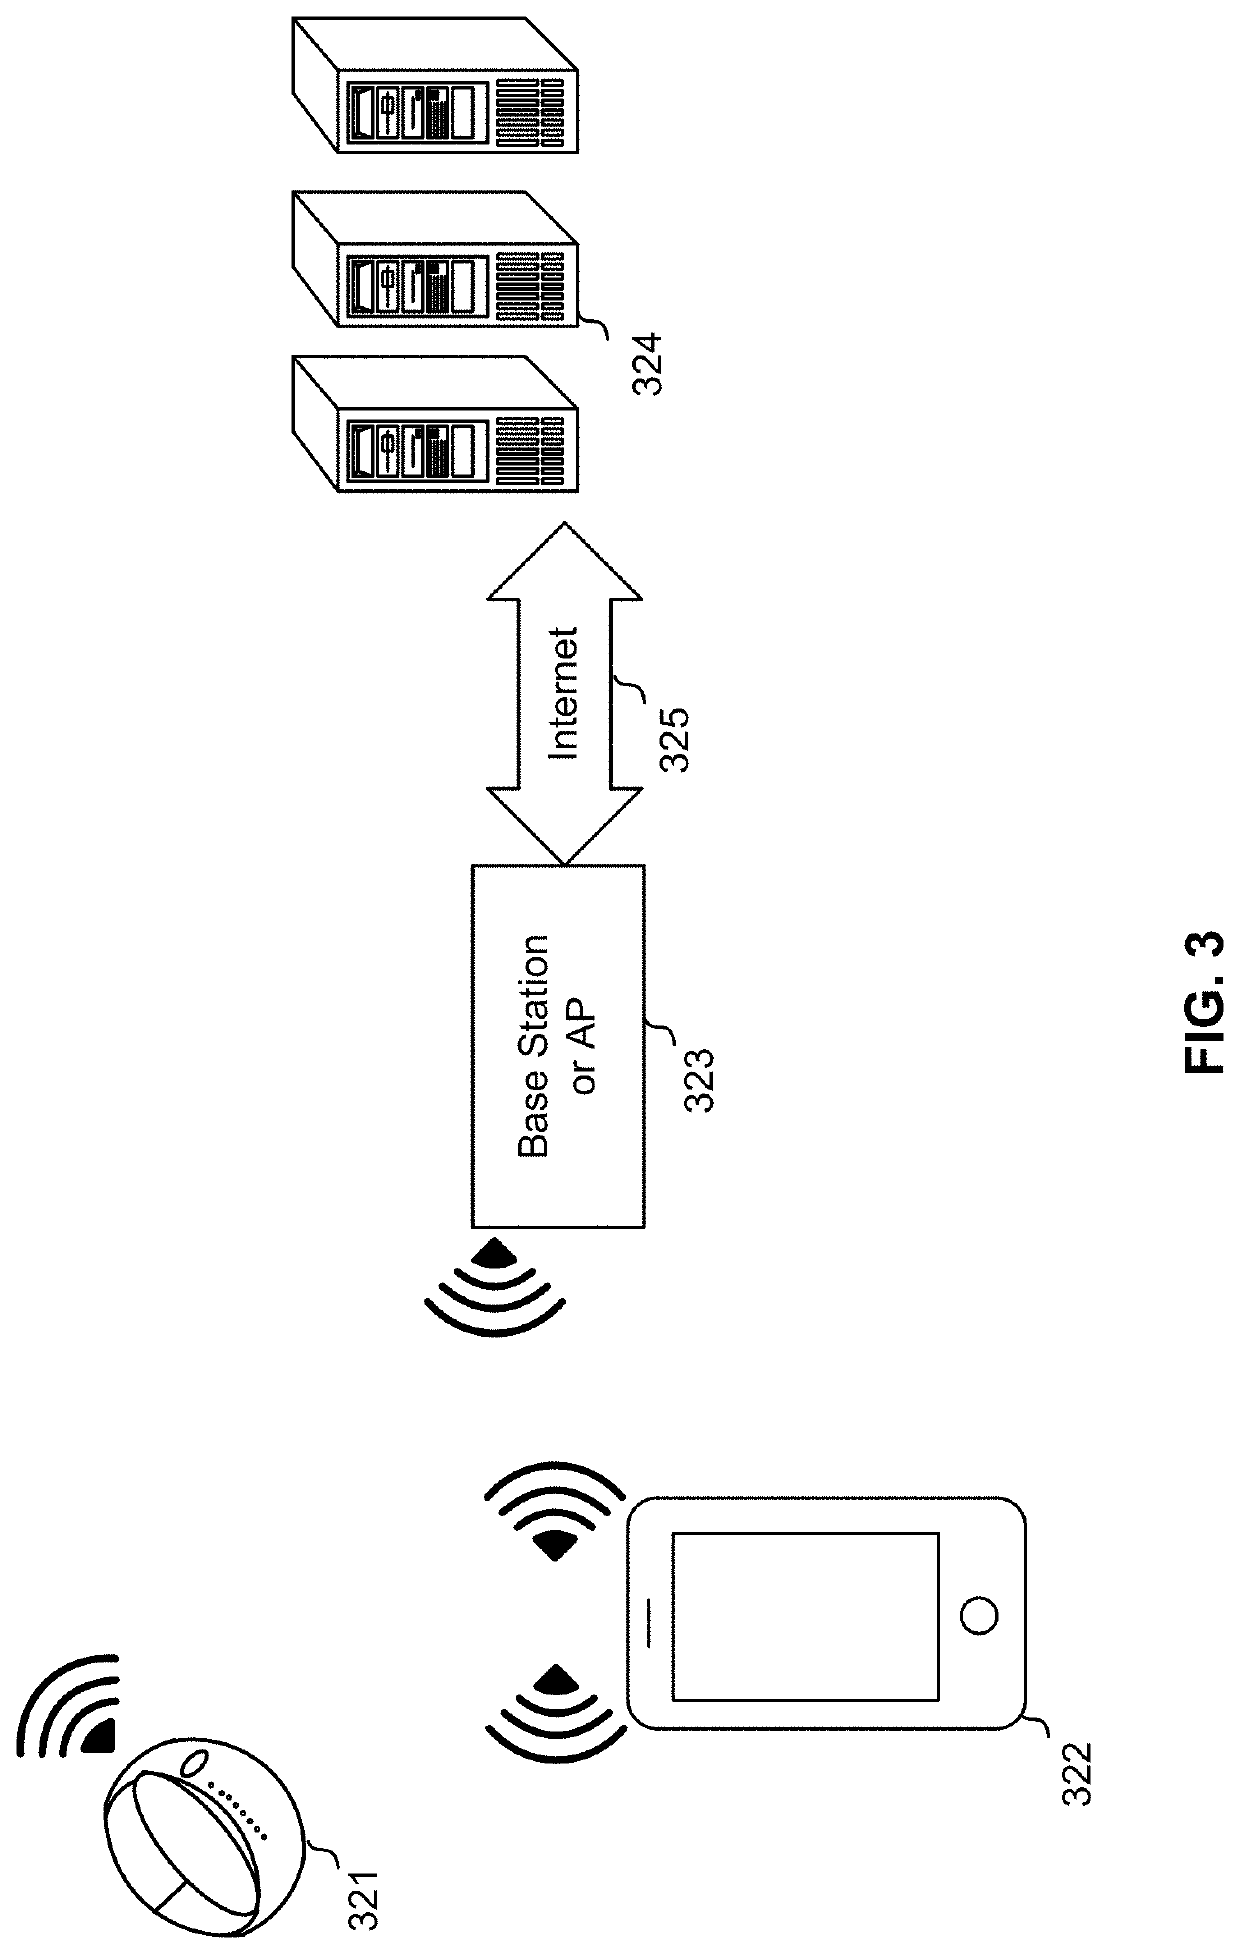 Automated detection of a physical behavior event and corresponding adjustment of a medication dispensing system based on historical events